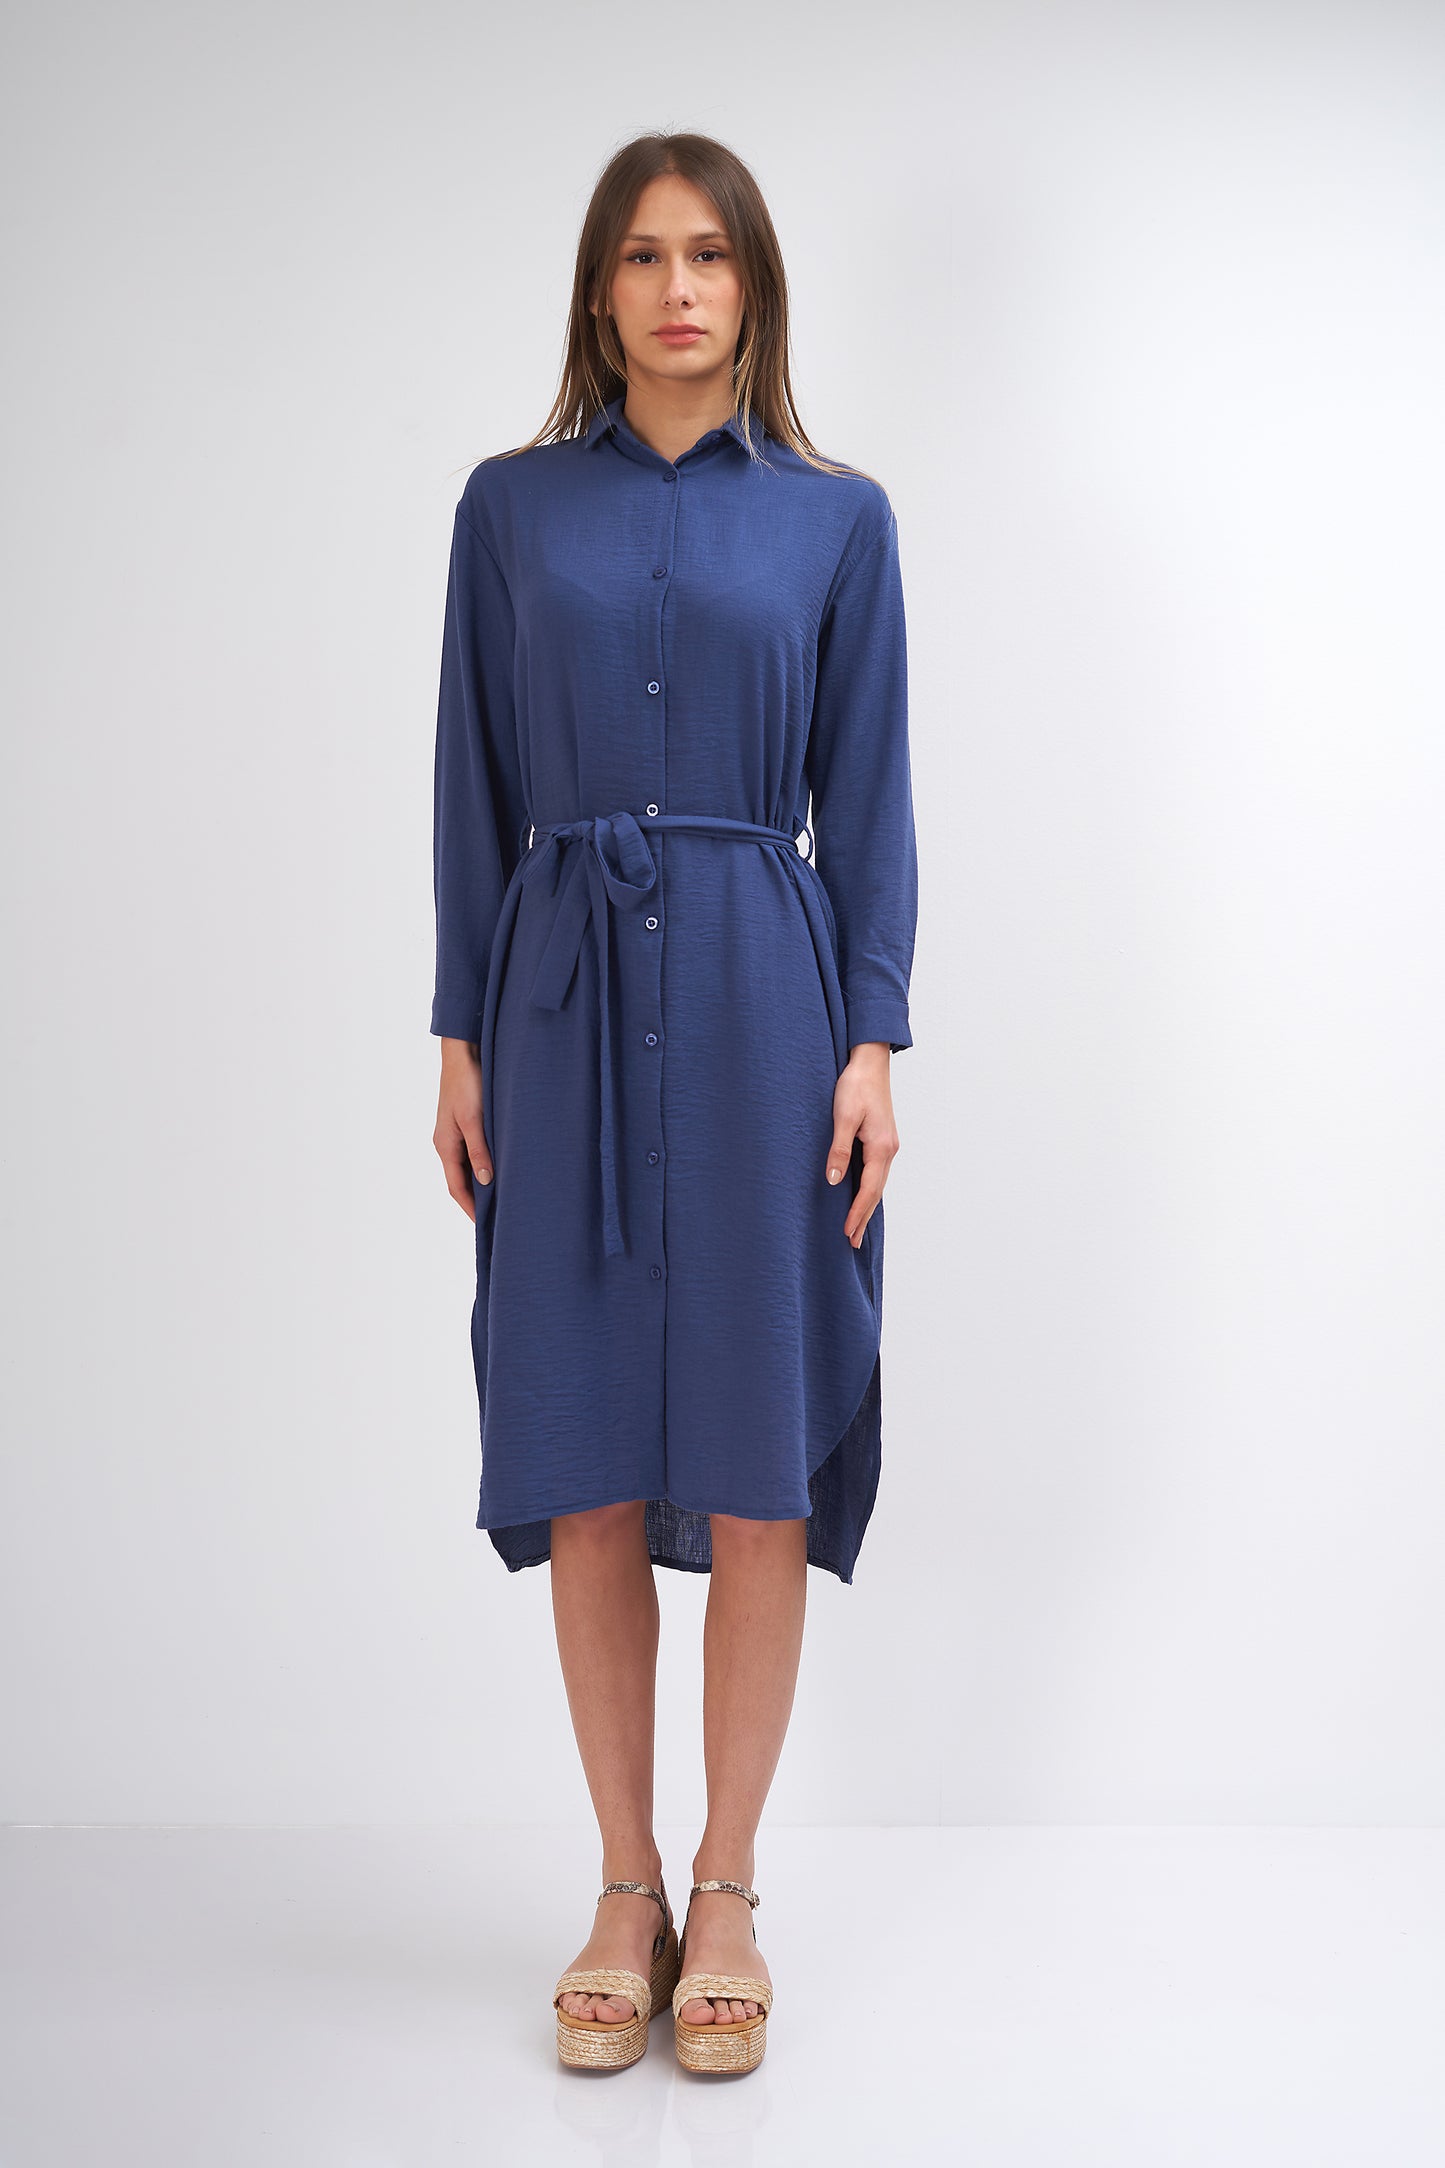 Simple dress - with a belt